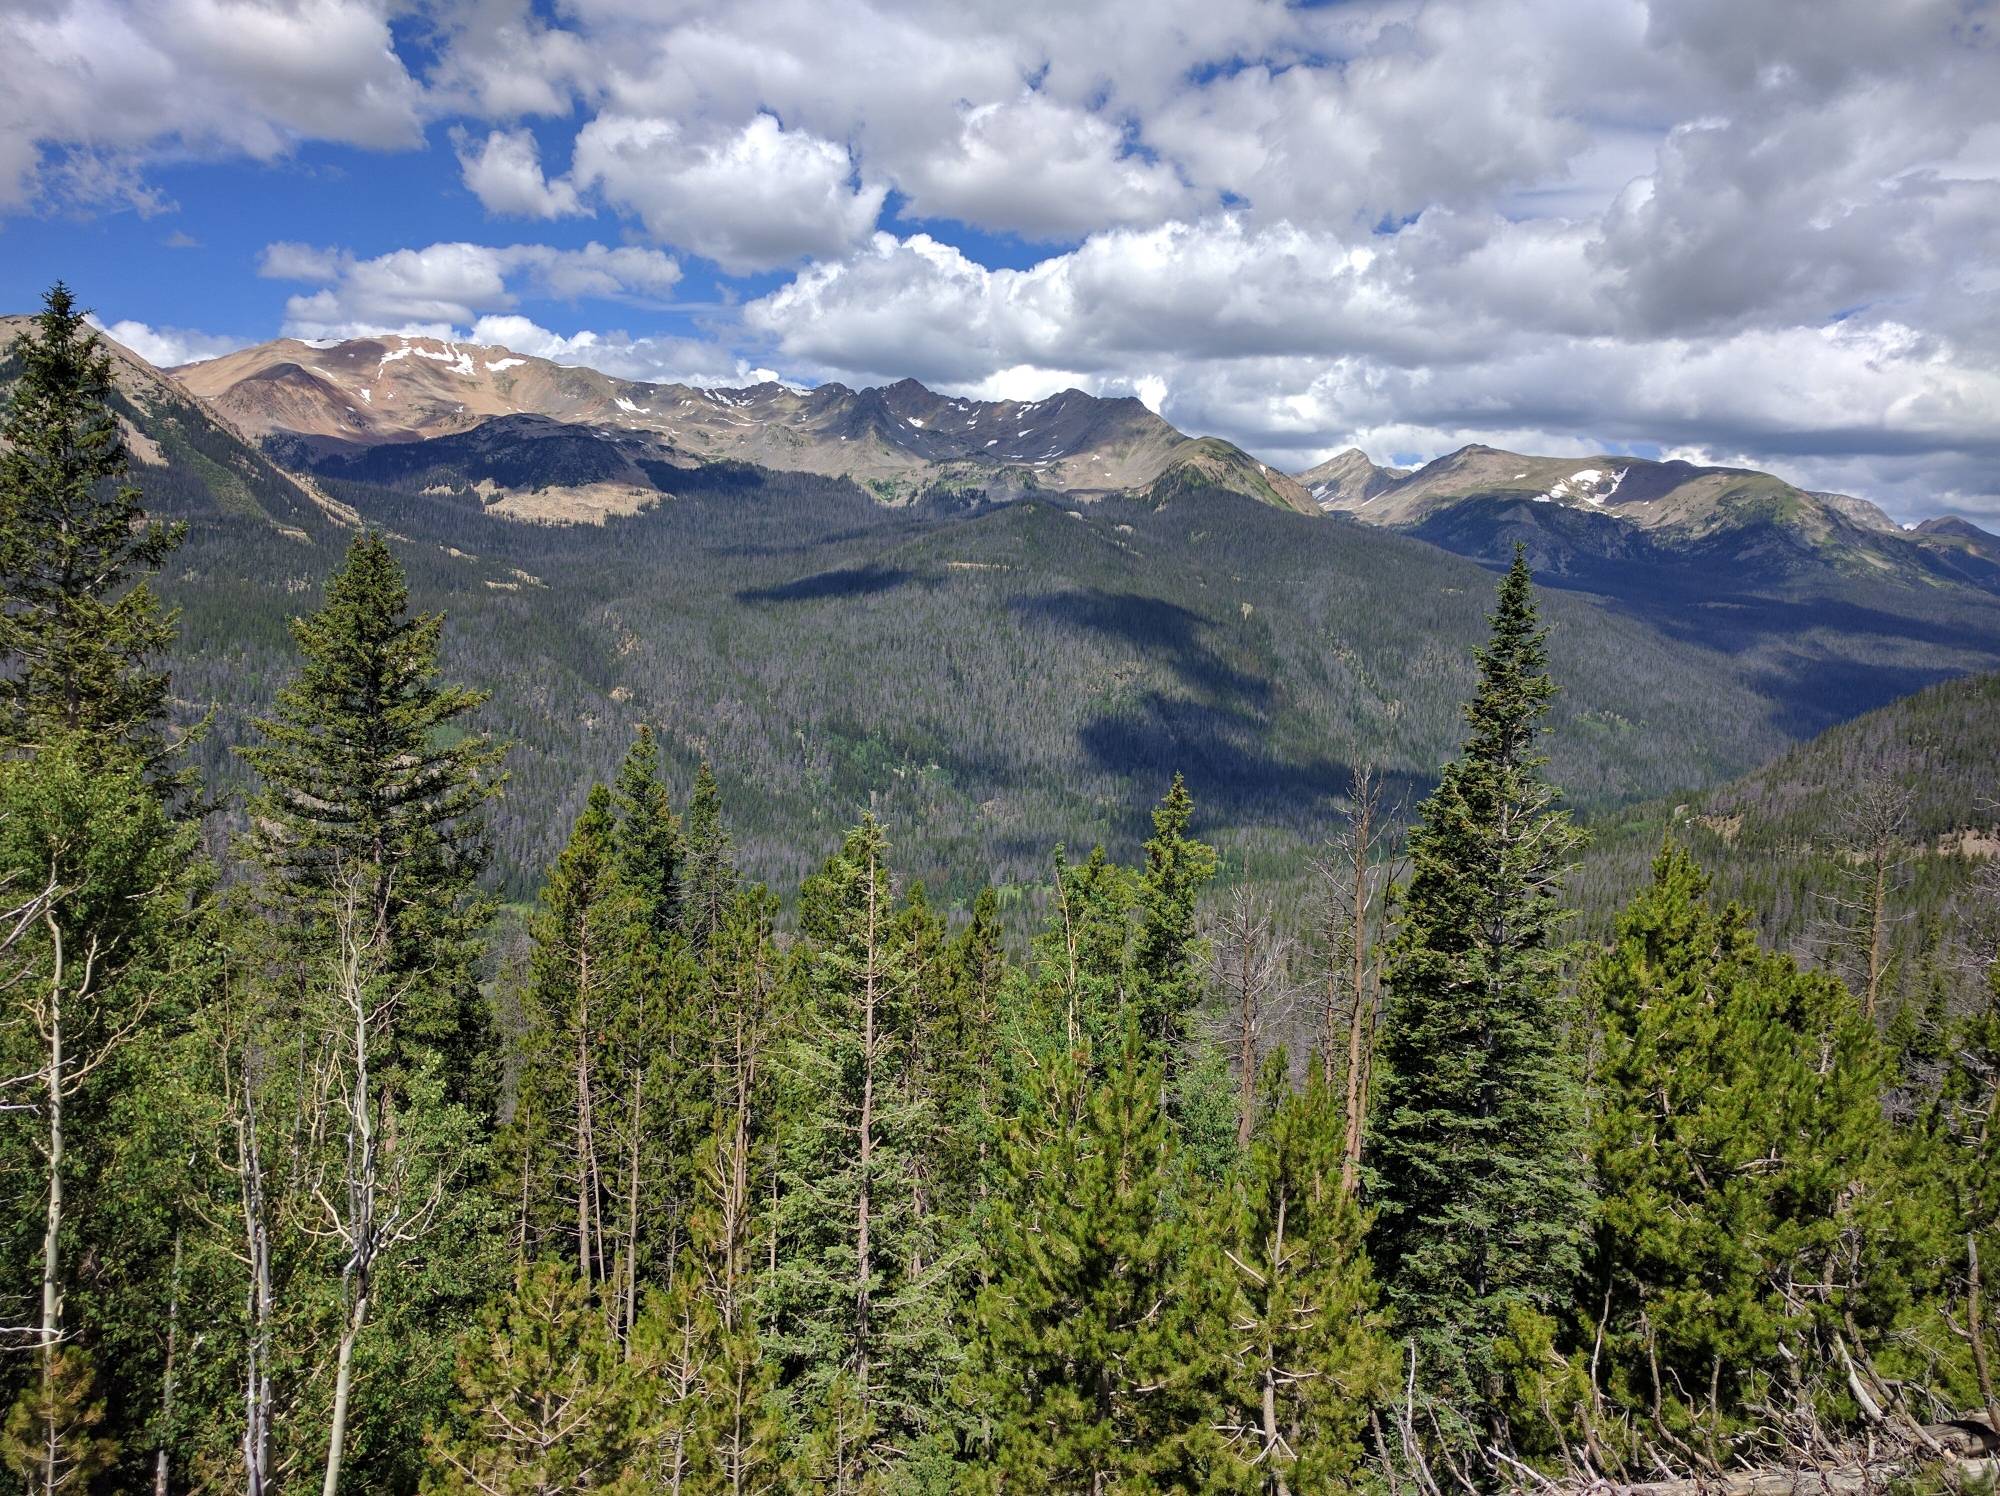 Image: A view from the Farview Curve of the Trail Ridge Road